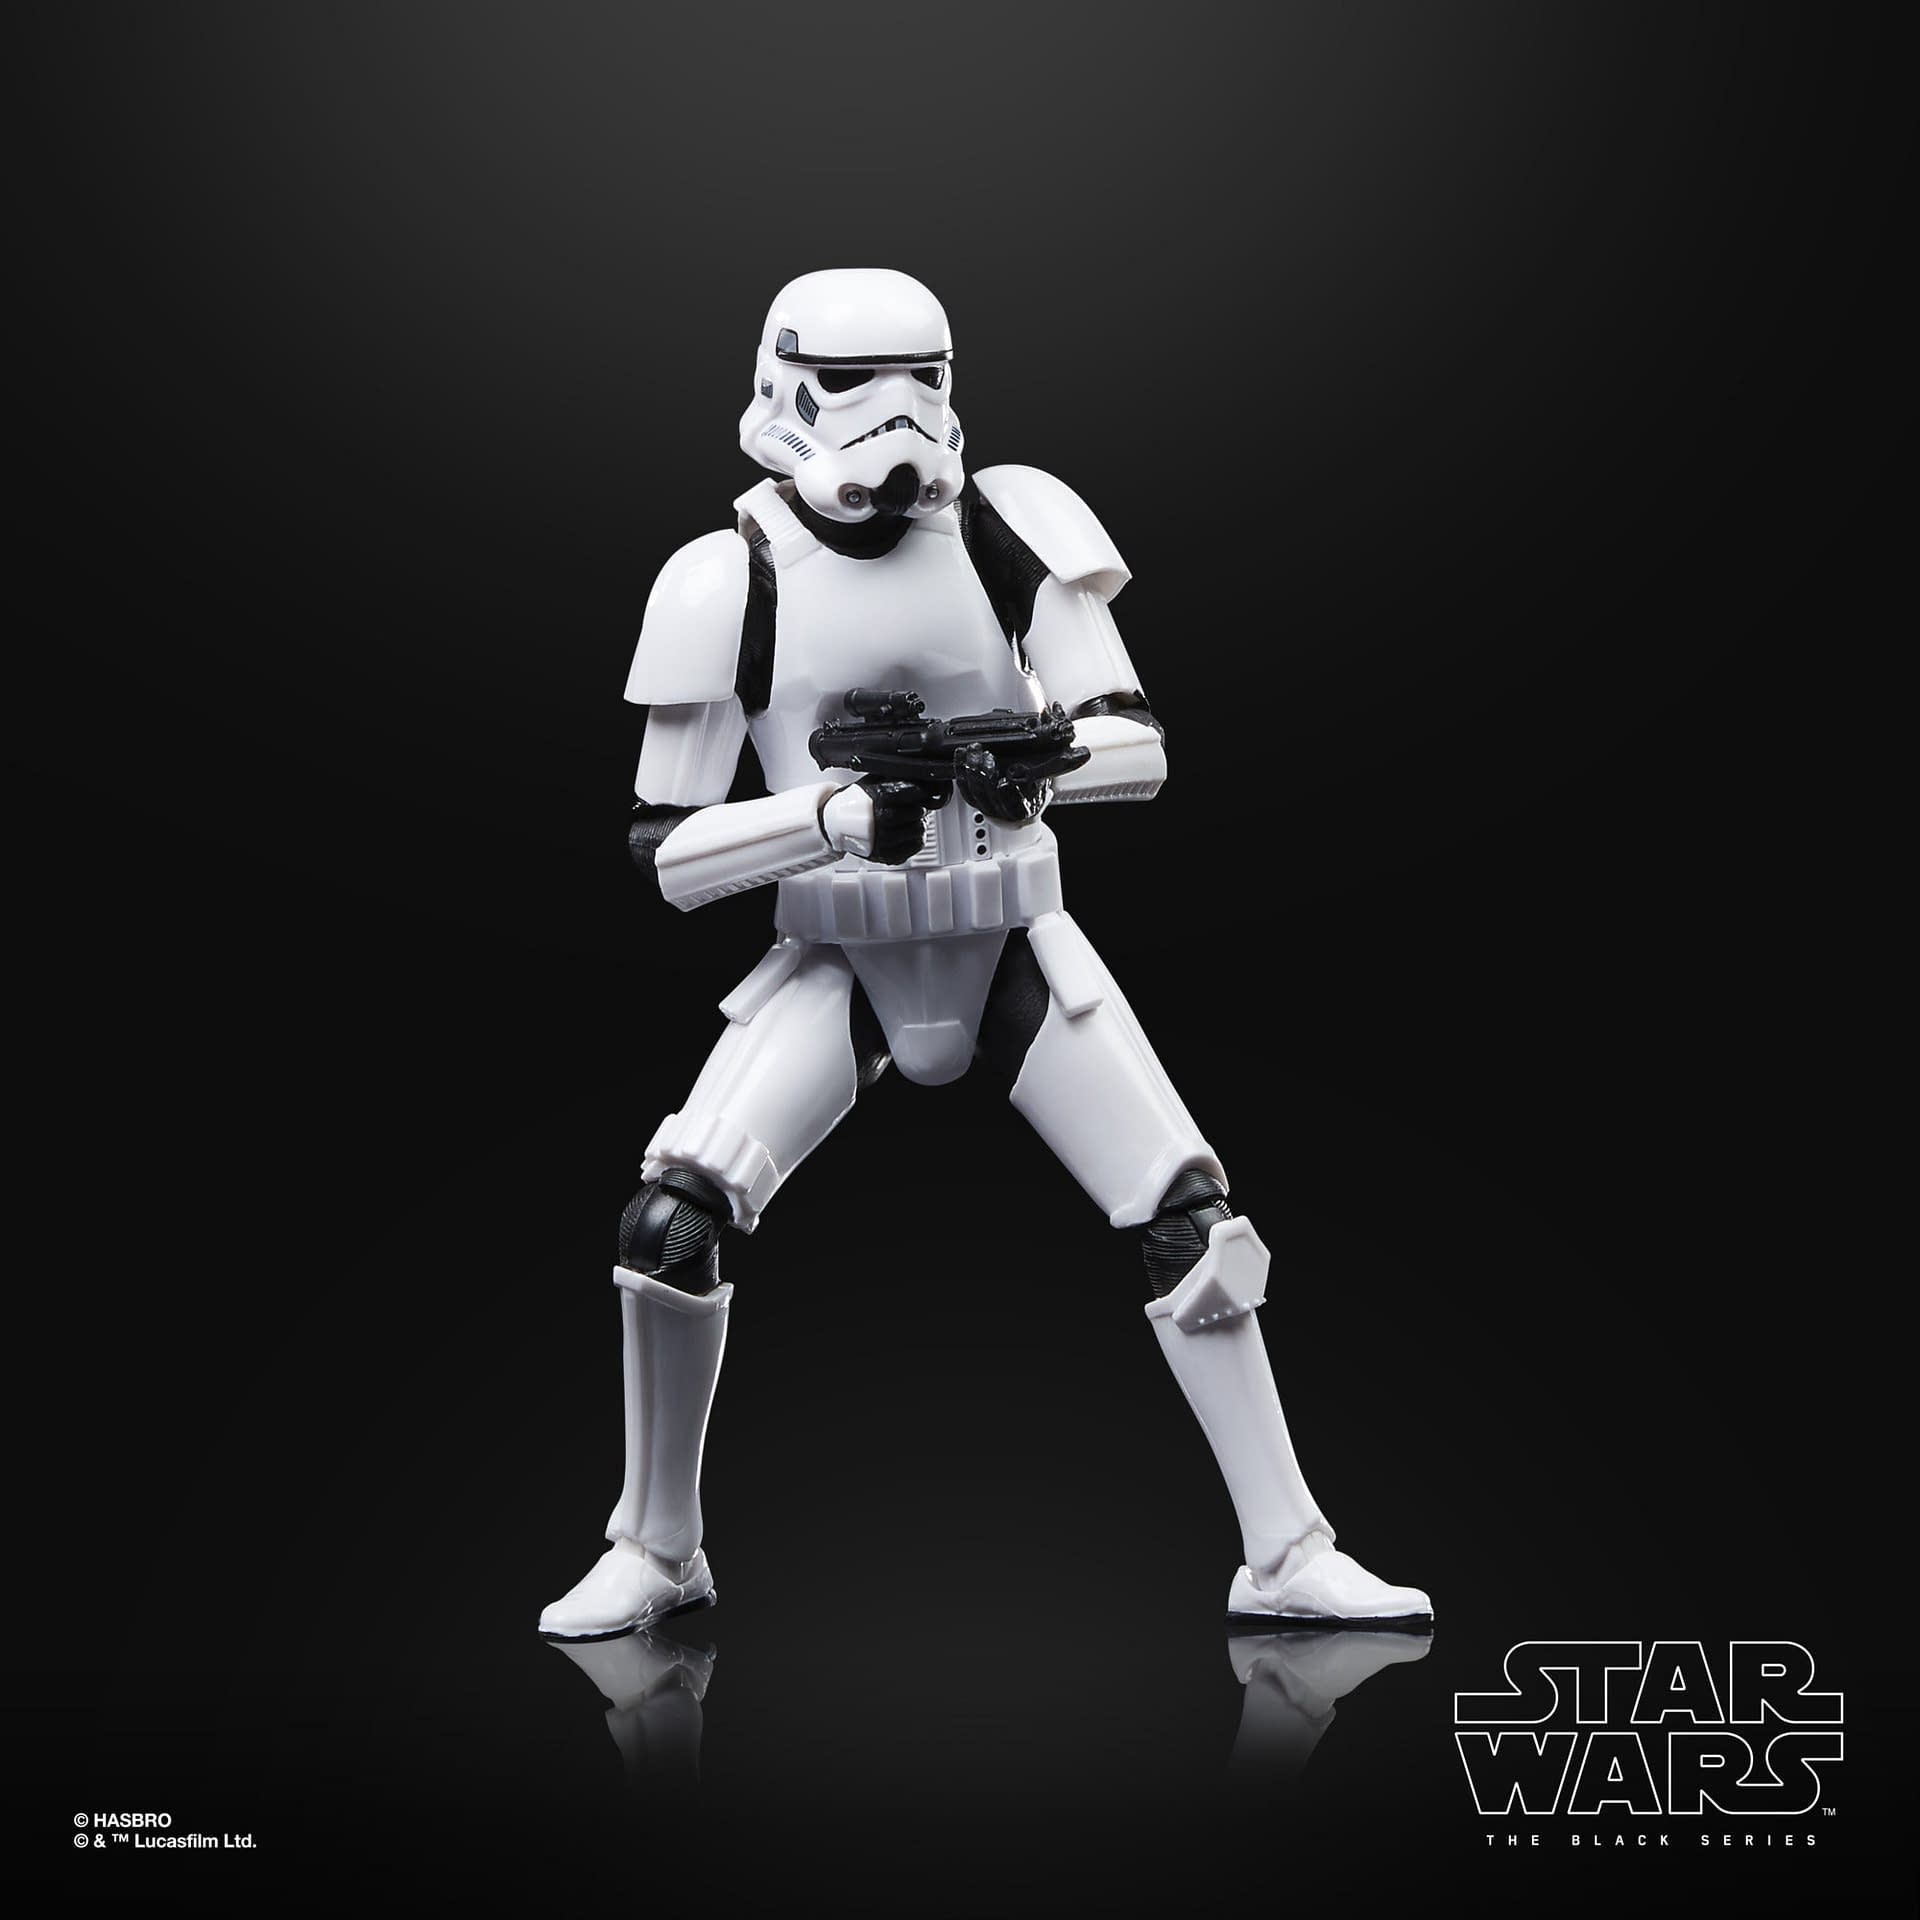 Star Wars: ROTJ Stormtrooper Deploys for 40th Anniversary with Hasbro